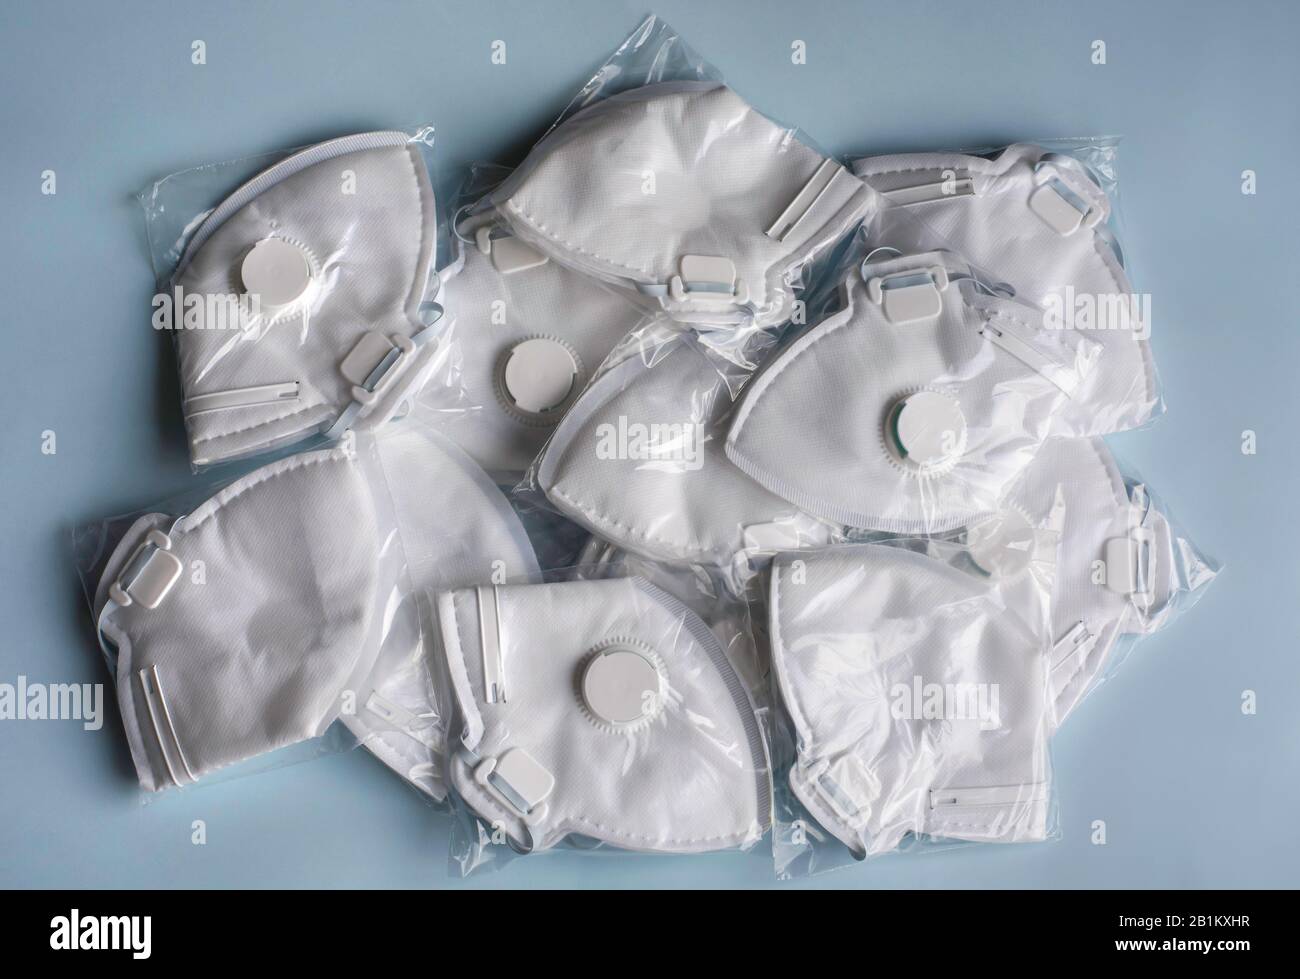 A lot of medical face dust masks, disposable FFP3 respirators. Concept of coronavirus, air pollution, virus, flu, infectious diseases and precautions. Stock Photo